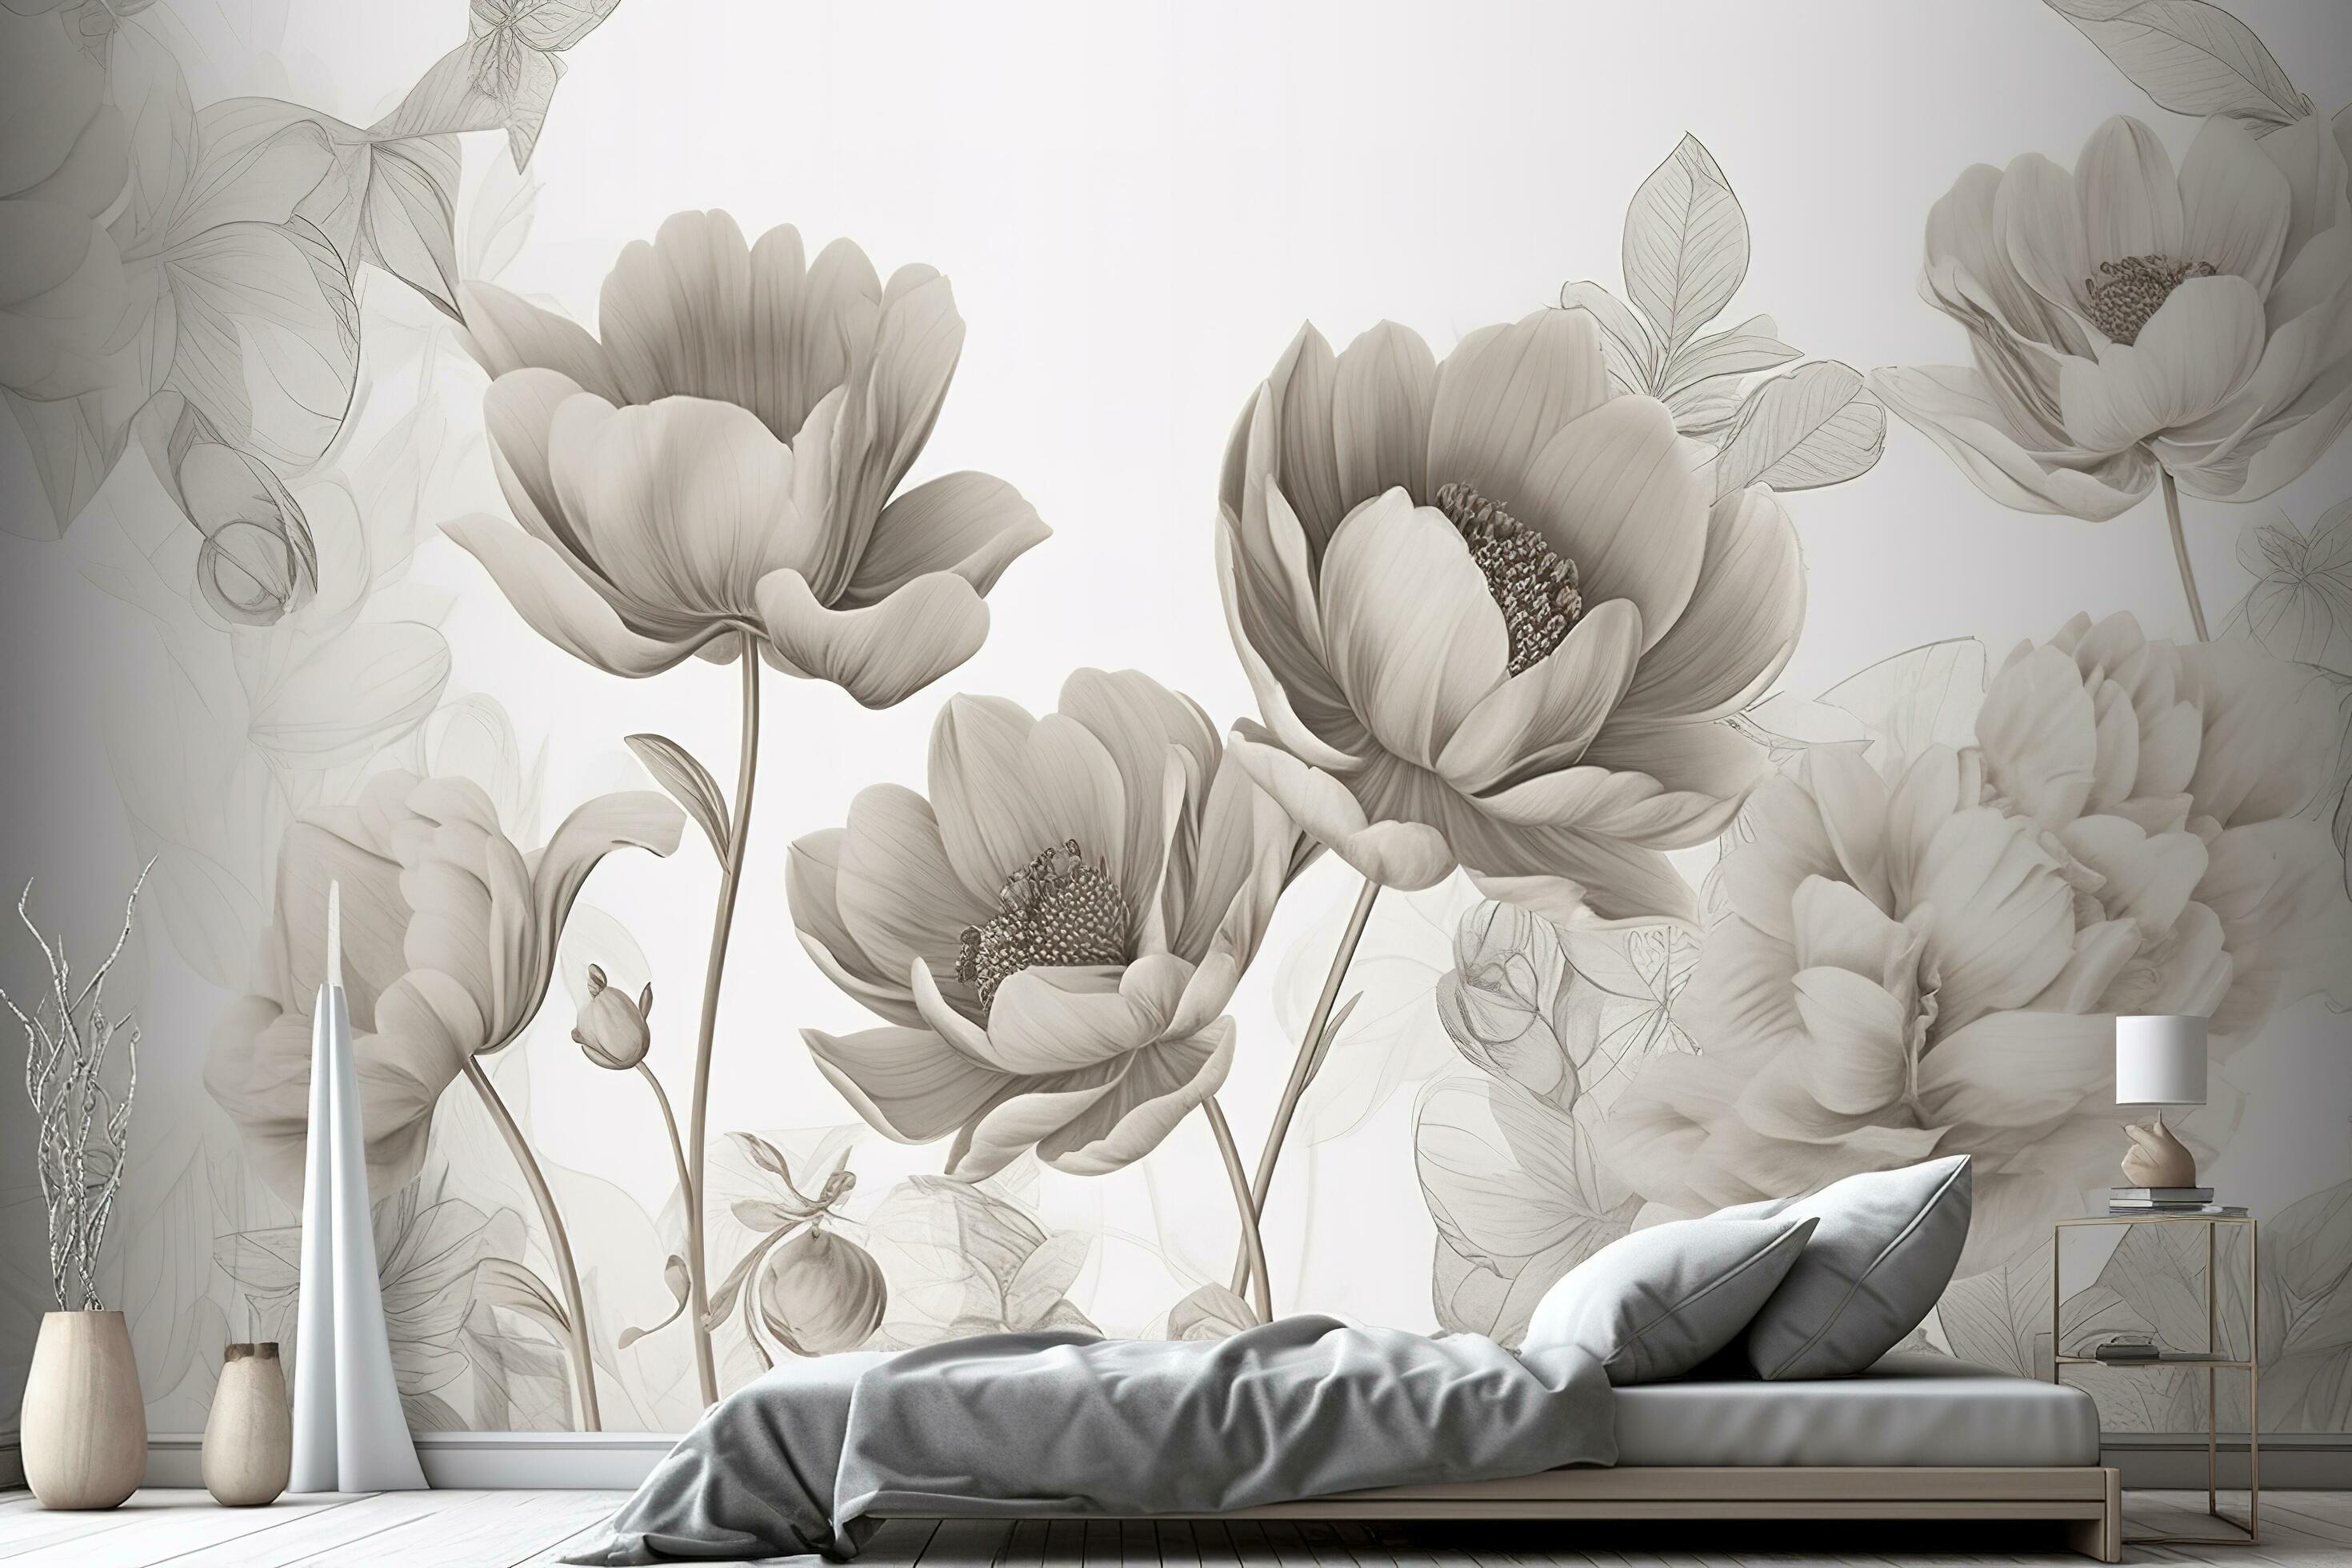 Peonies and foliage wallpaper, feature mural wallpaper, bedroom floral  mural wallpaper, green mural feature wallpaper, rental